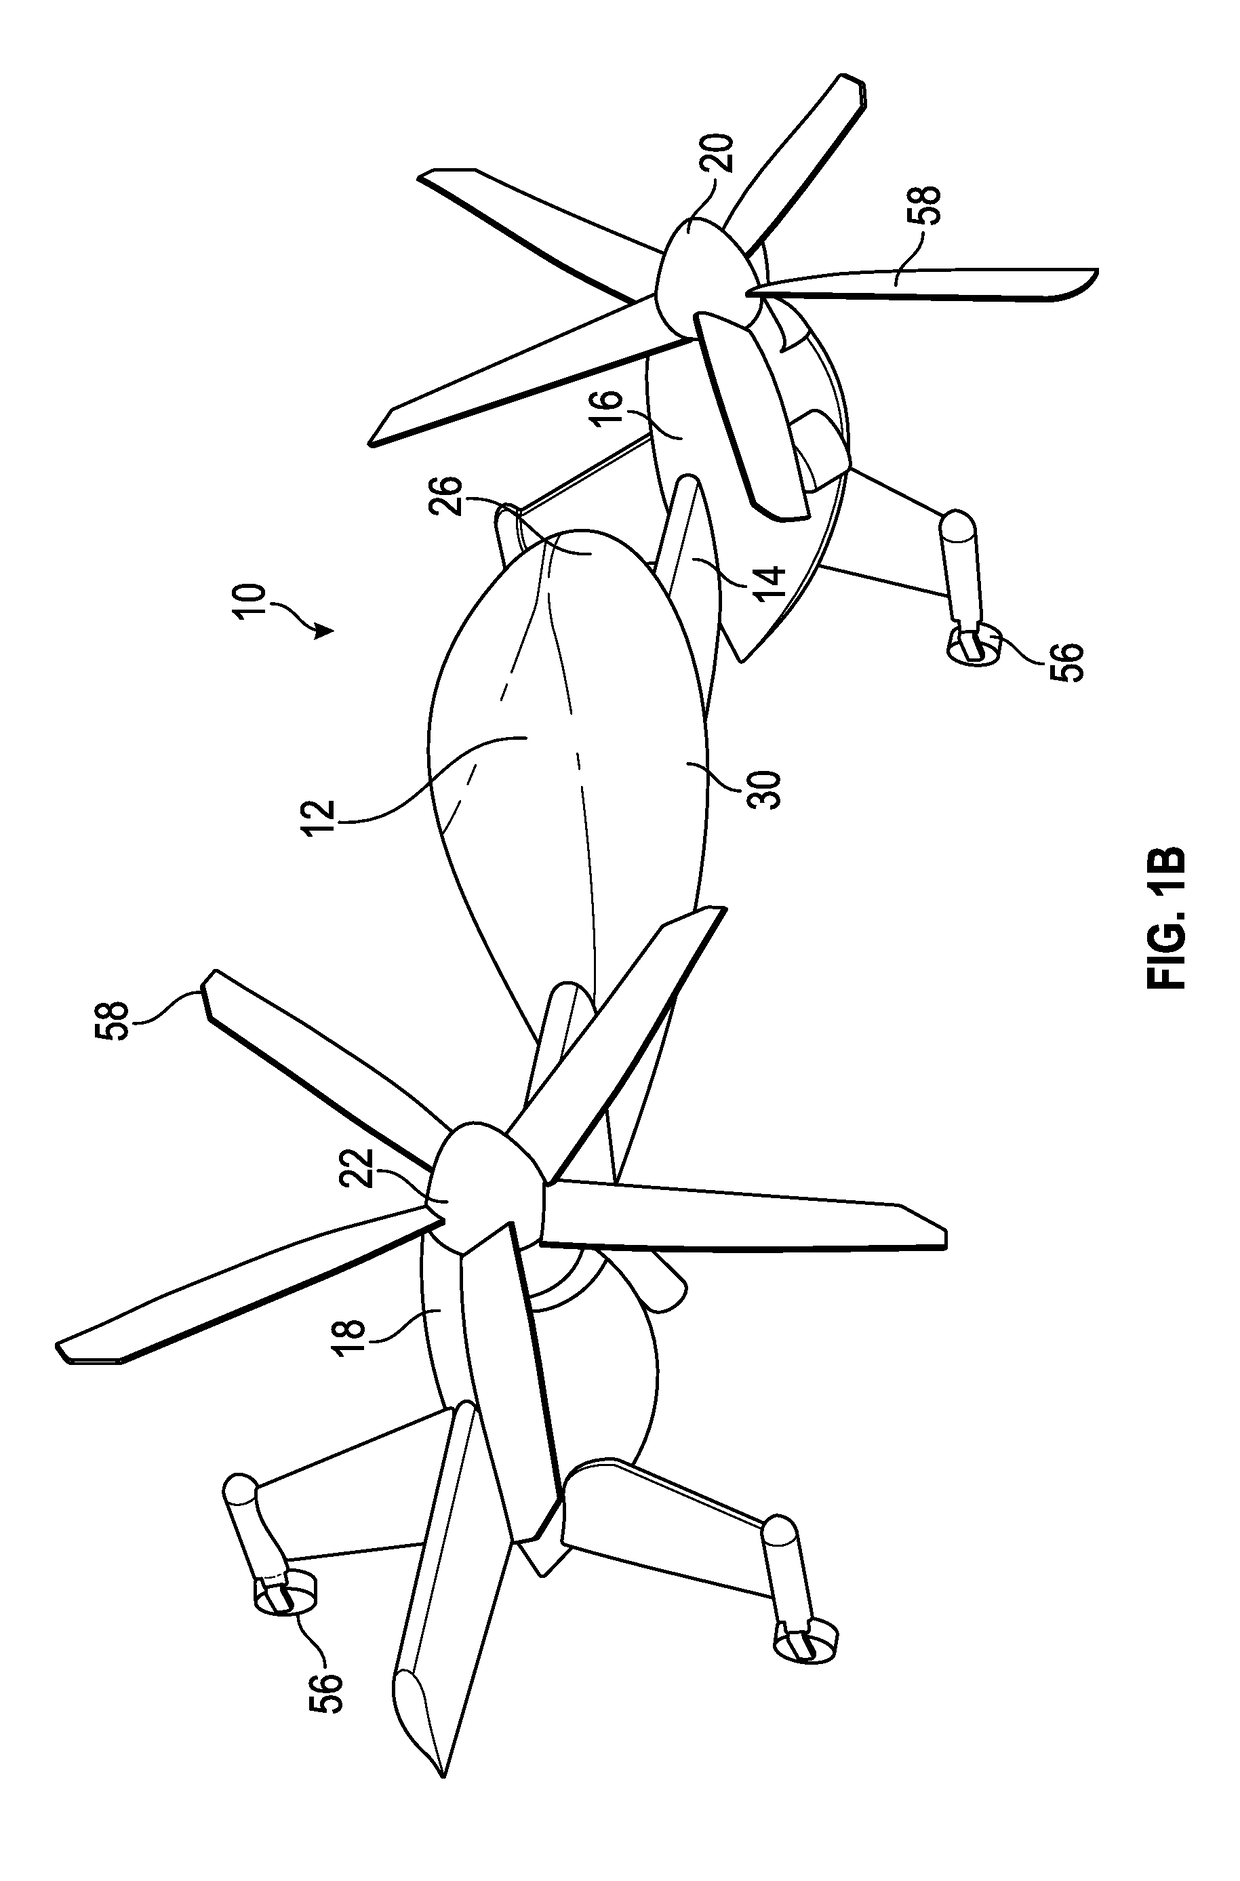 Vertical take-off and landing aircraft with hybrid power and method